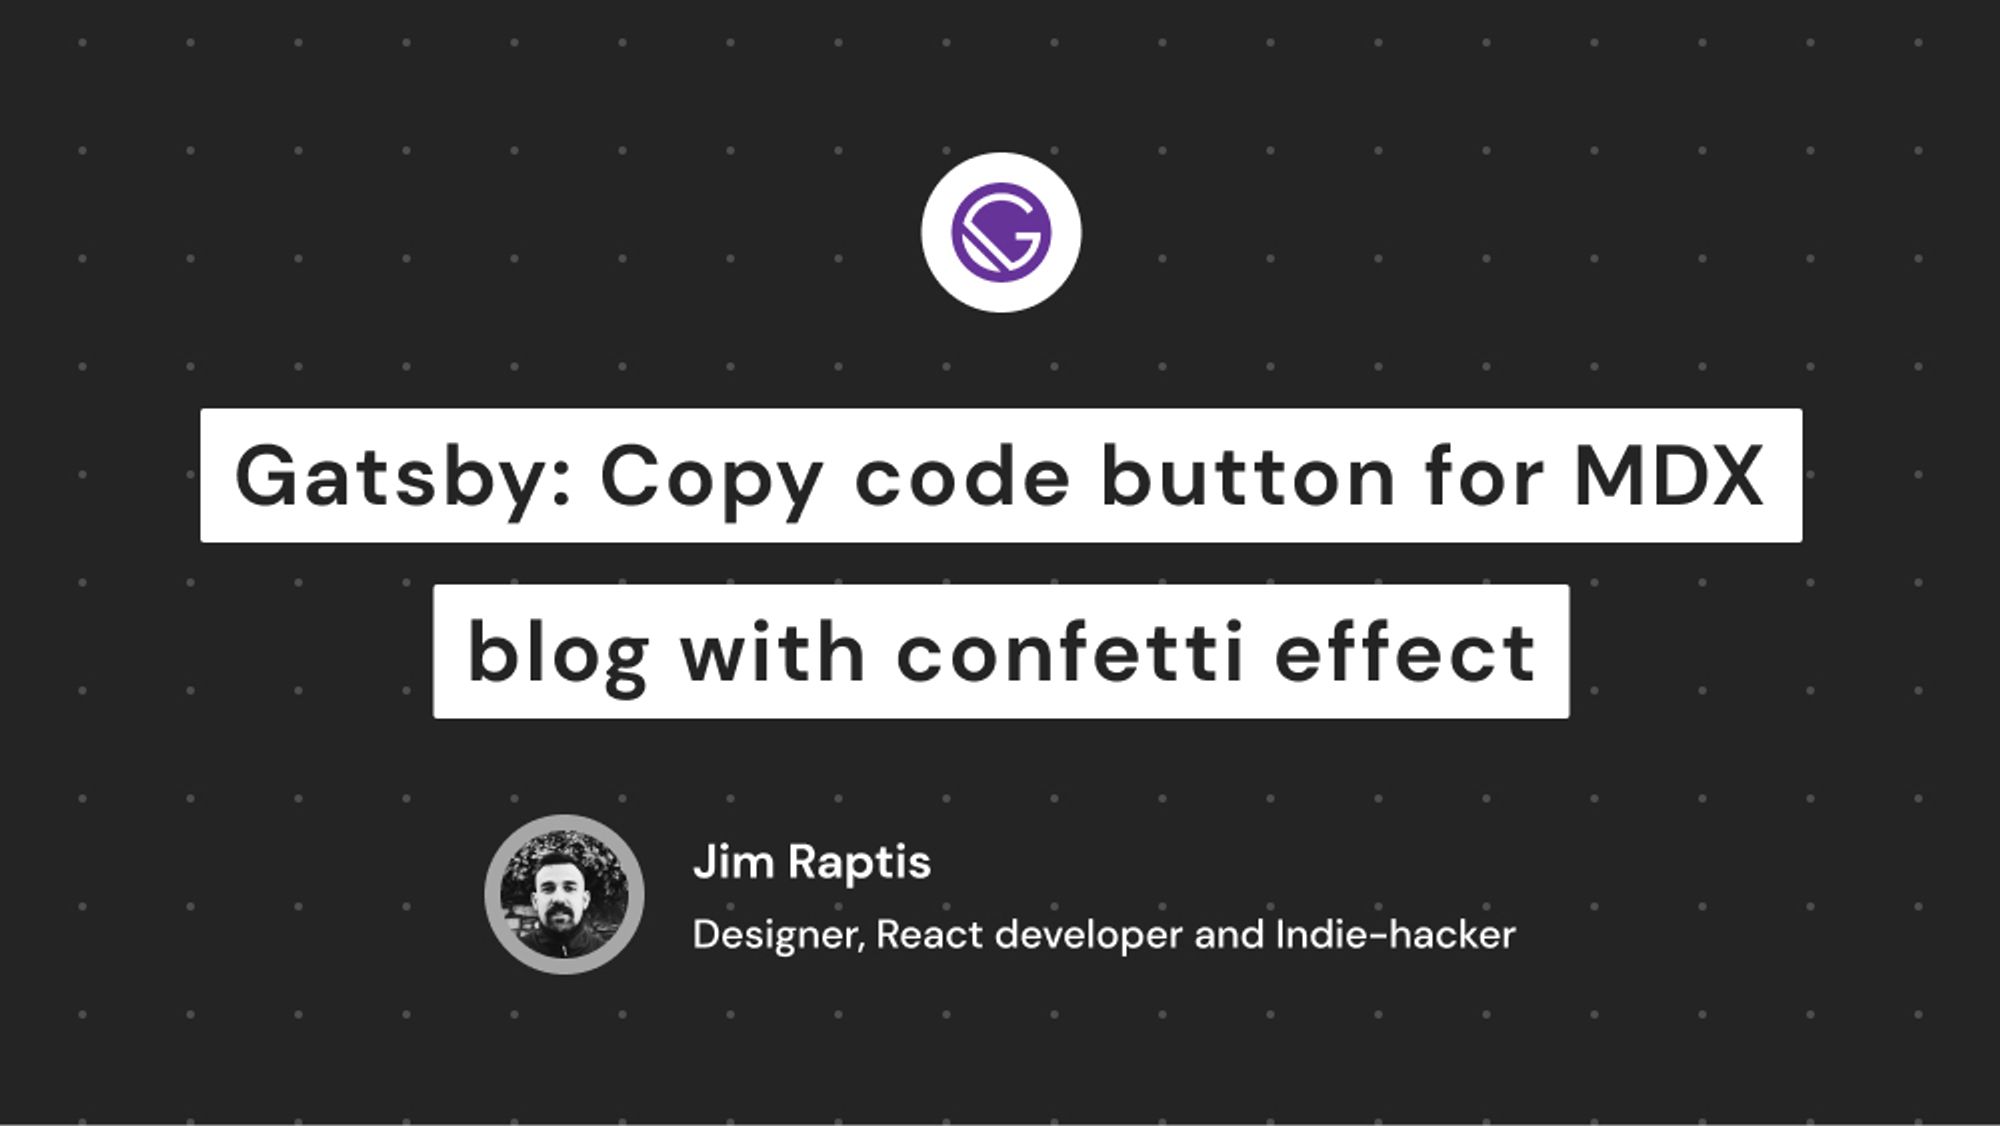 Gatsby: Copy code button with confetti effect for MDX blog